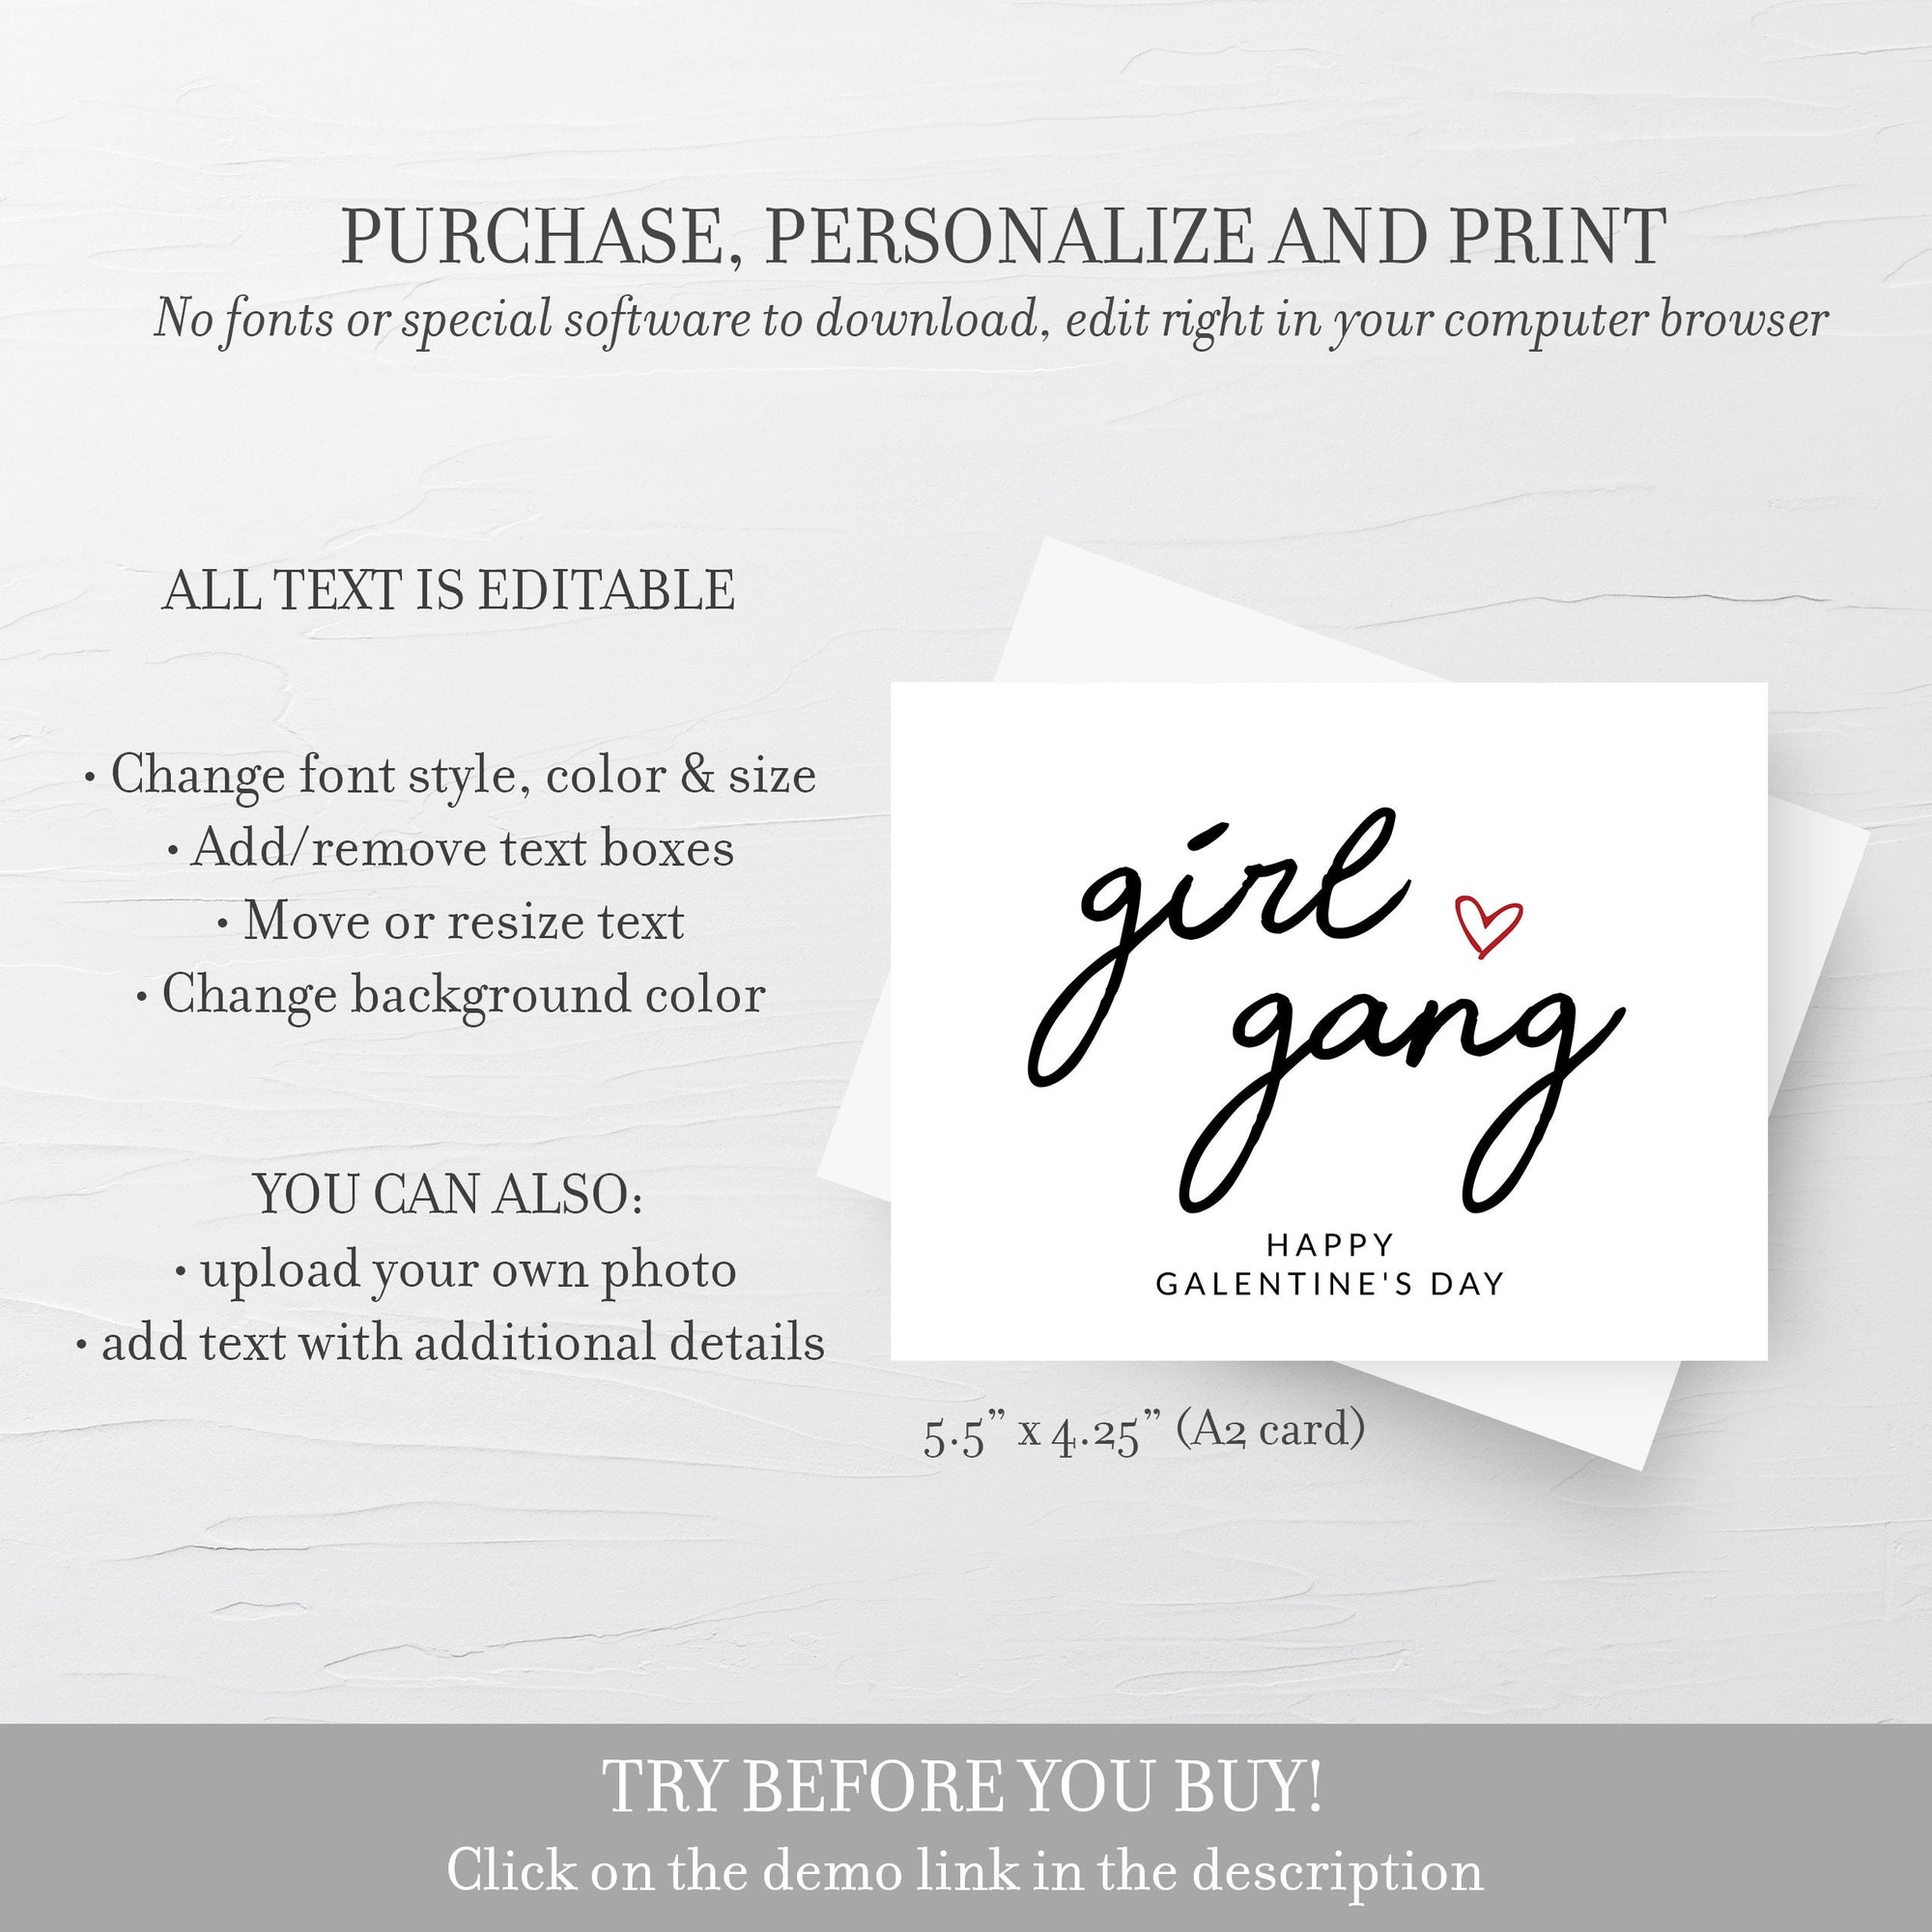 Printable Galentines Day Card Template, Happy Galentines Day Card, Girl Gang, Galentines Card DIGITAL DOWNLOAD, A2